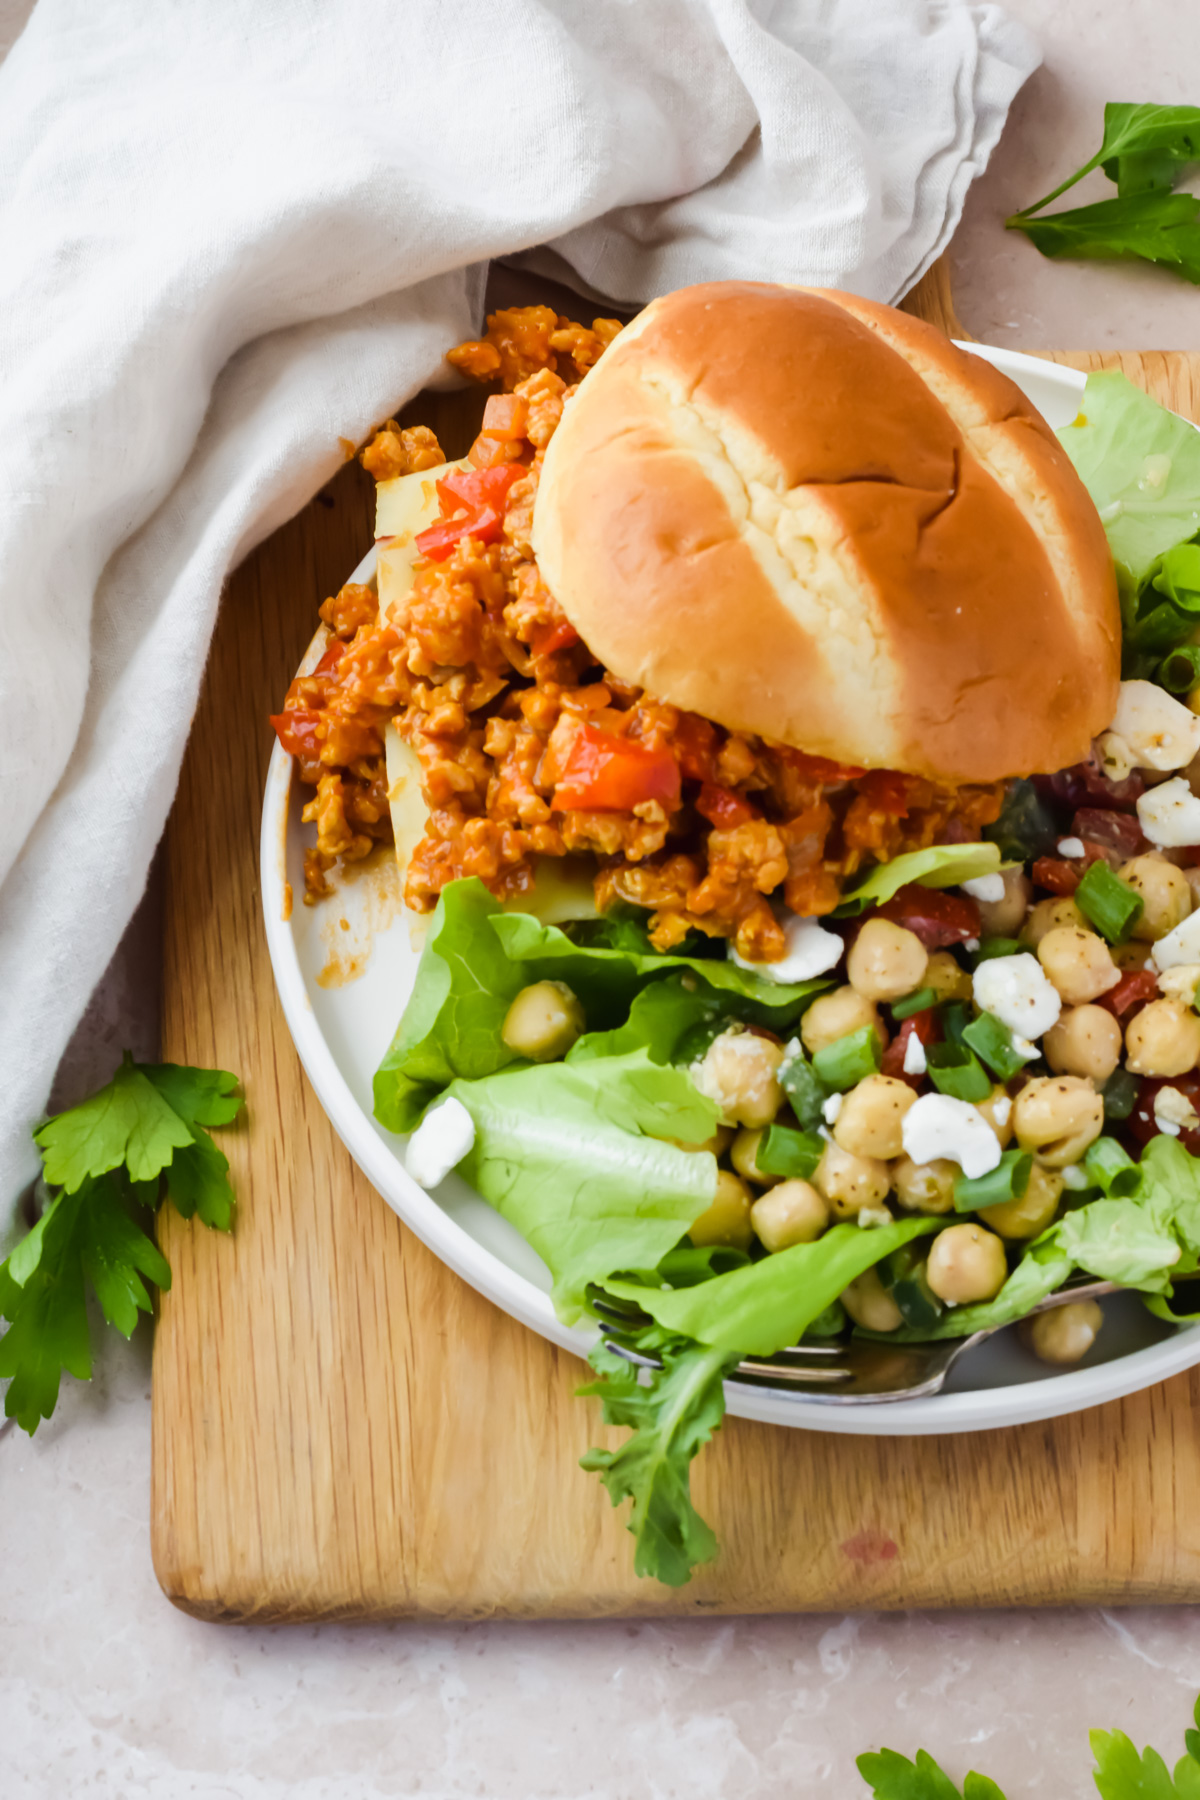 chicken sloppy joe beside mixed greens salad on white serving plate.